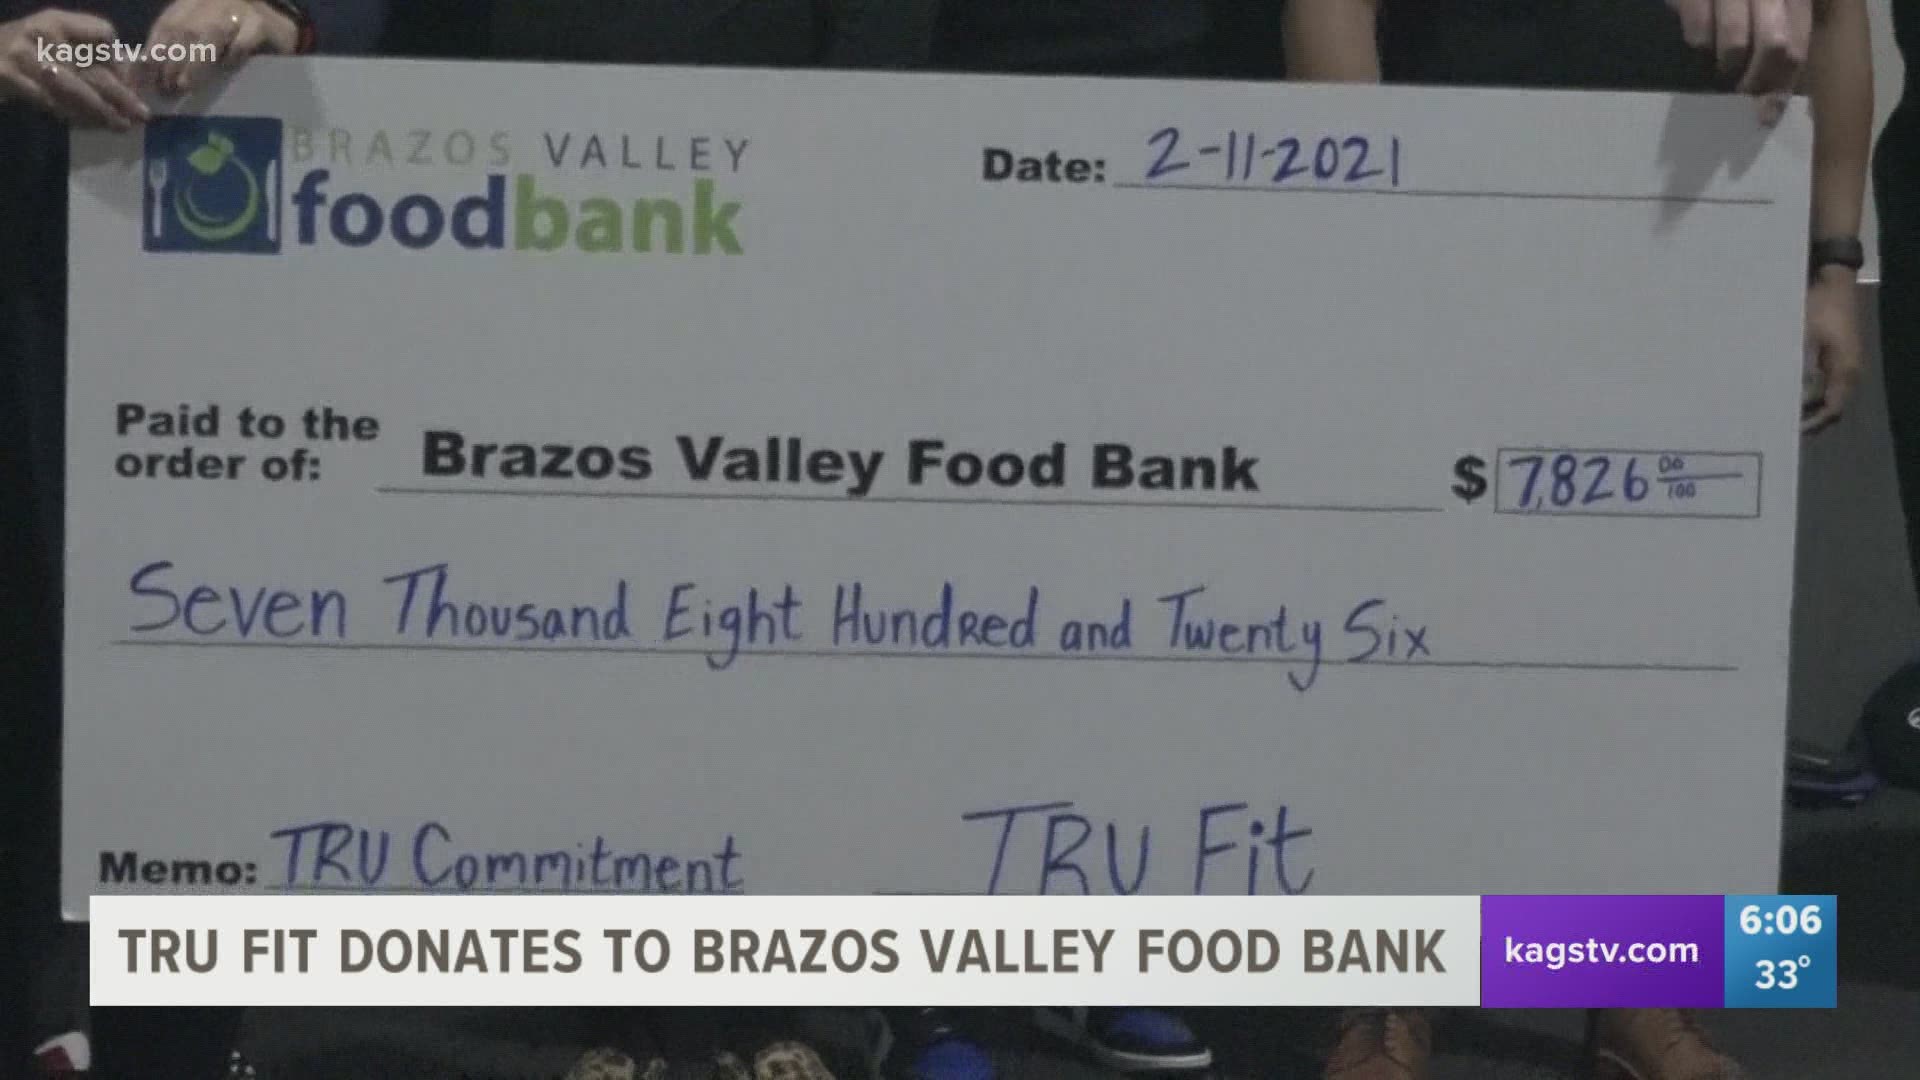 The check will help the Brazos Valley Food Bank pay for about 40,000 meals.